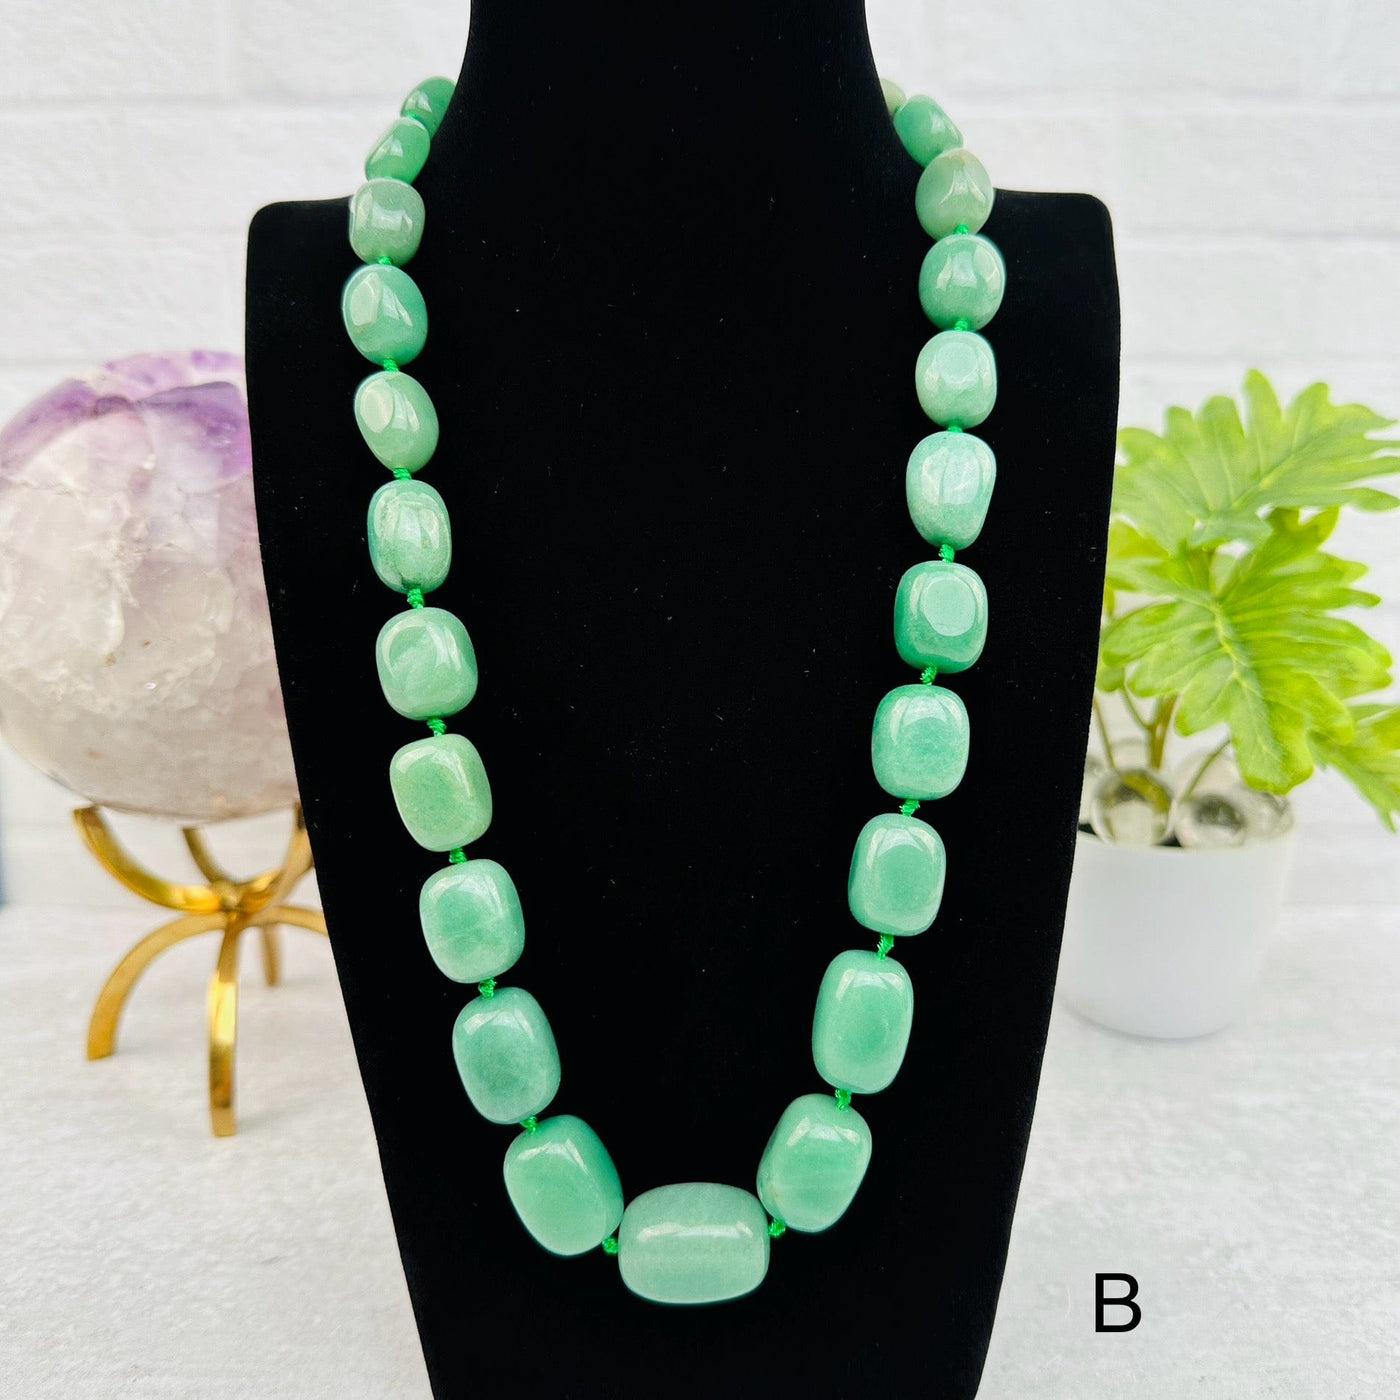 green aventurine necklace displayed to show how it hangs